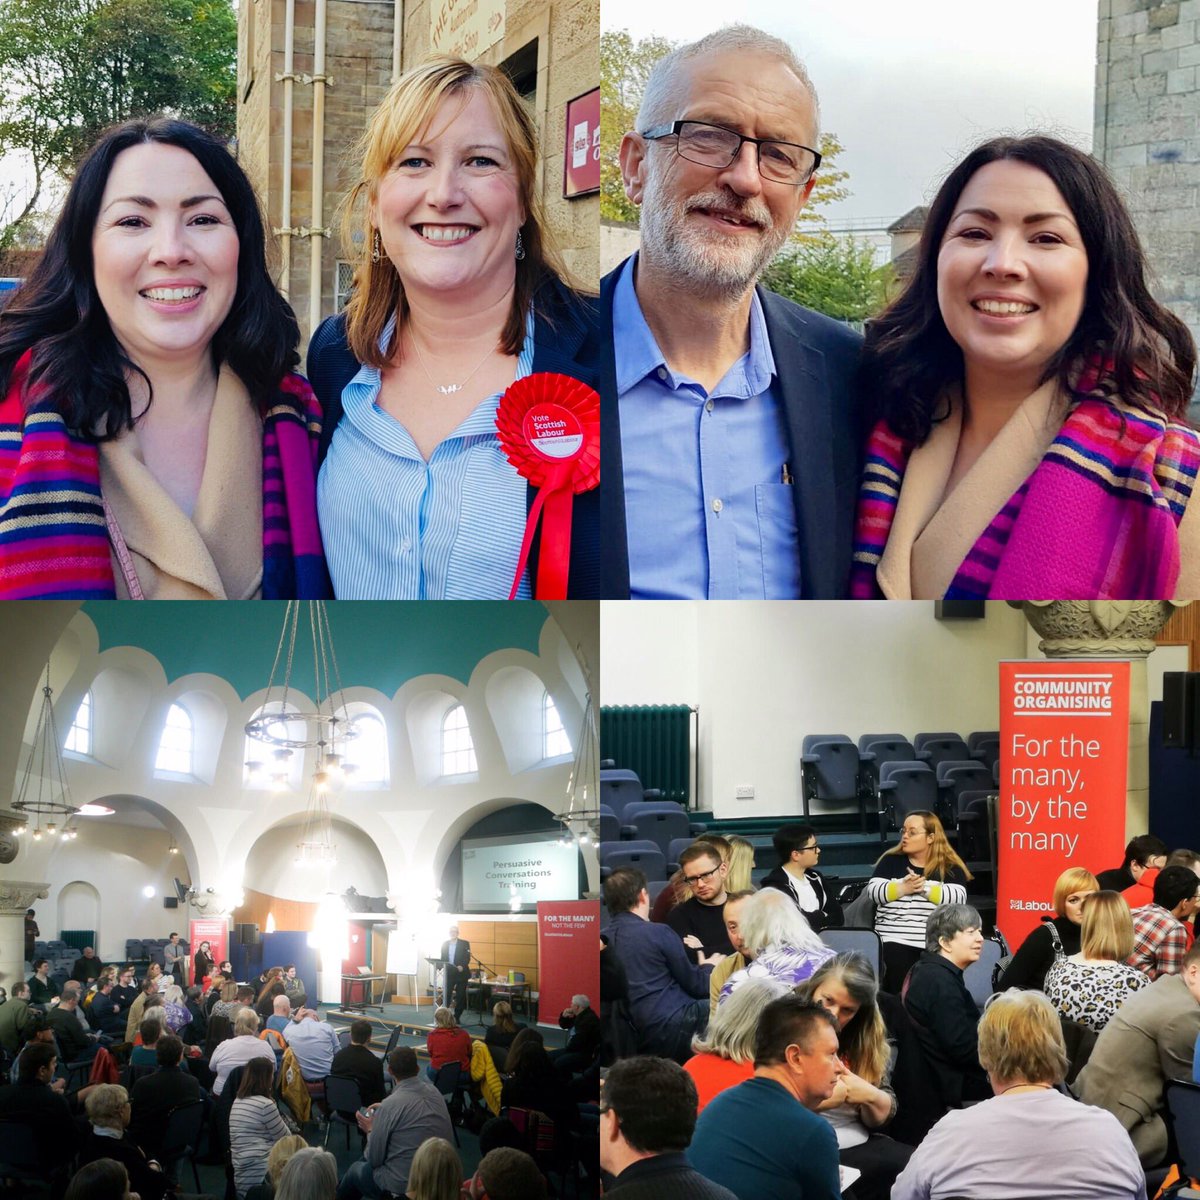 Brilliant to see new faces and committed activists coming together in Motherwell today to build our movement for political change. Only Labour, working with trade unions and communities will defeat this rotten Tory government. Join us @ByTheManyScot #persuasiveconversations 🌹